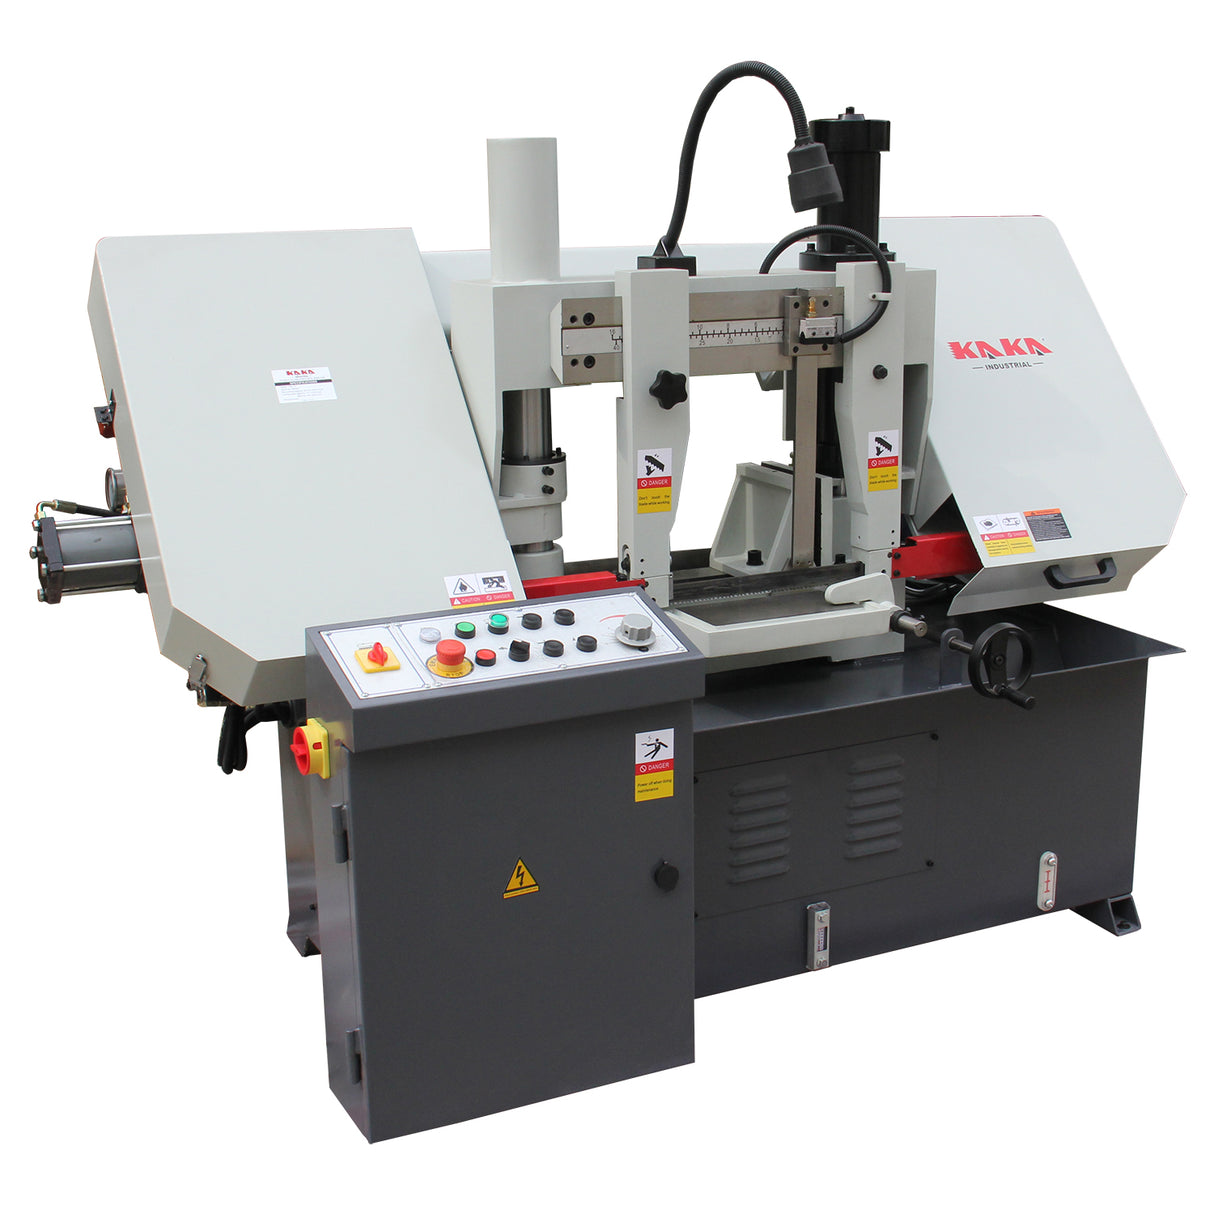 Kang Industrial TGK-14, ø350mm--350x350mm Gear Drive Double Column Band Saw with Hydraulic Clamping, 415V Power